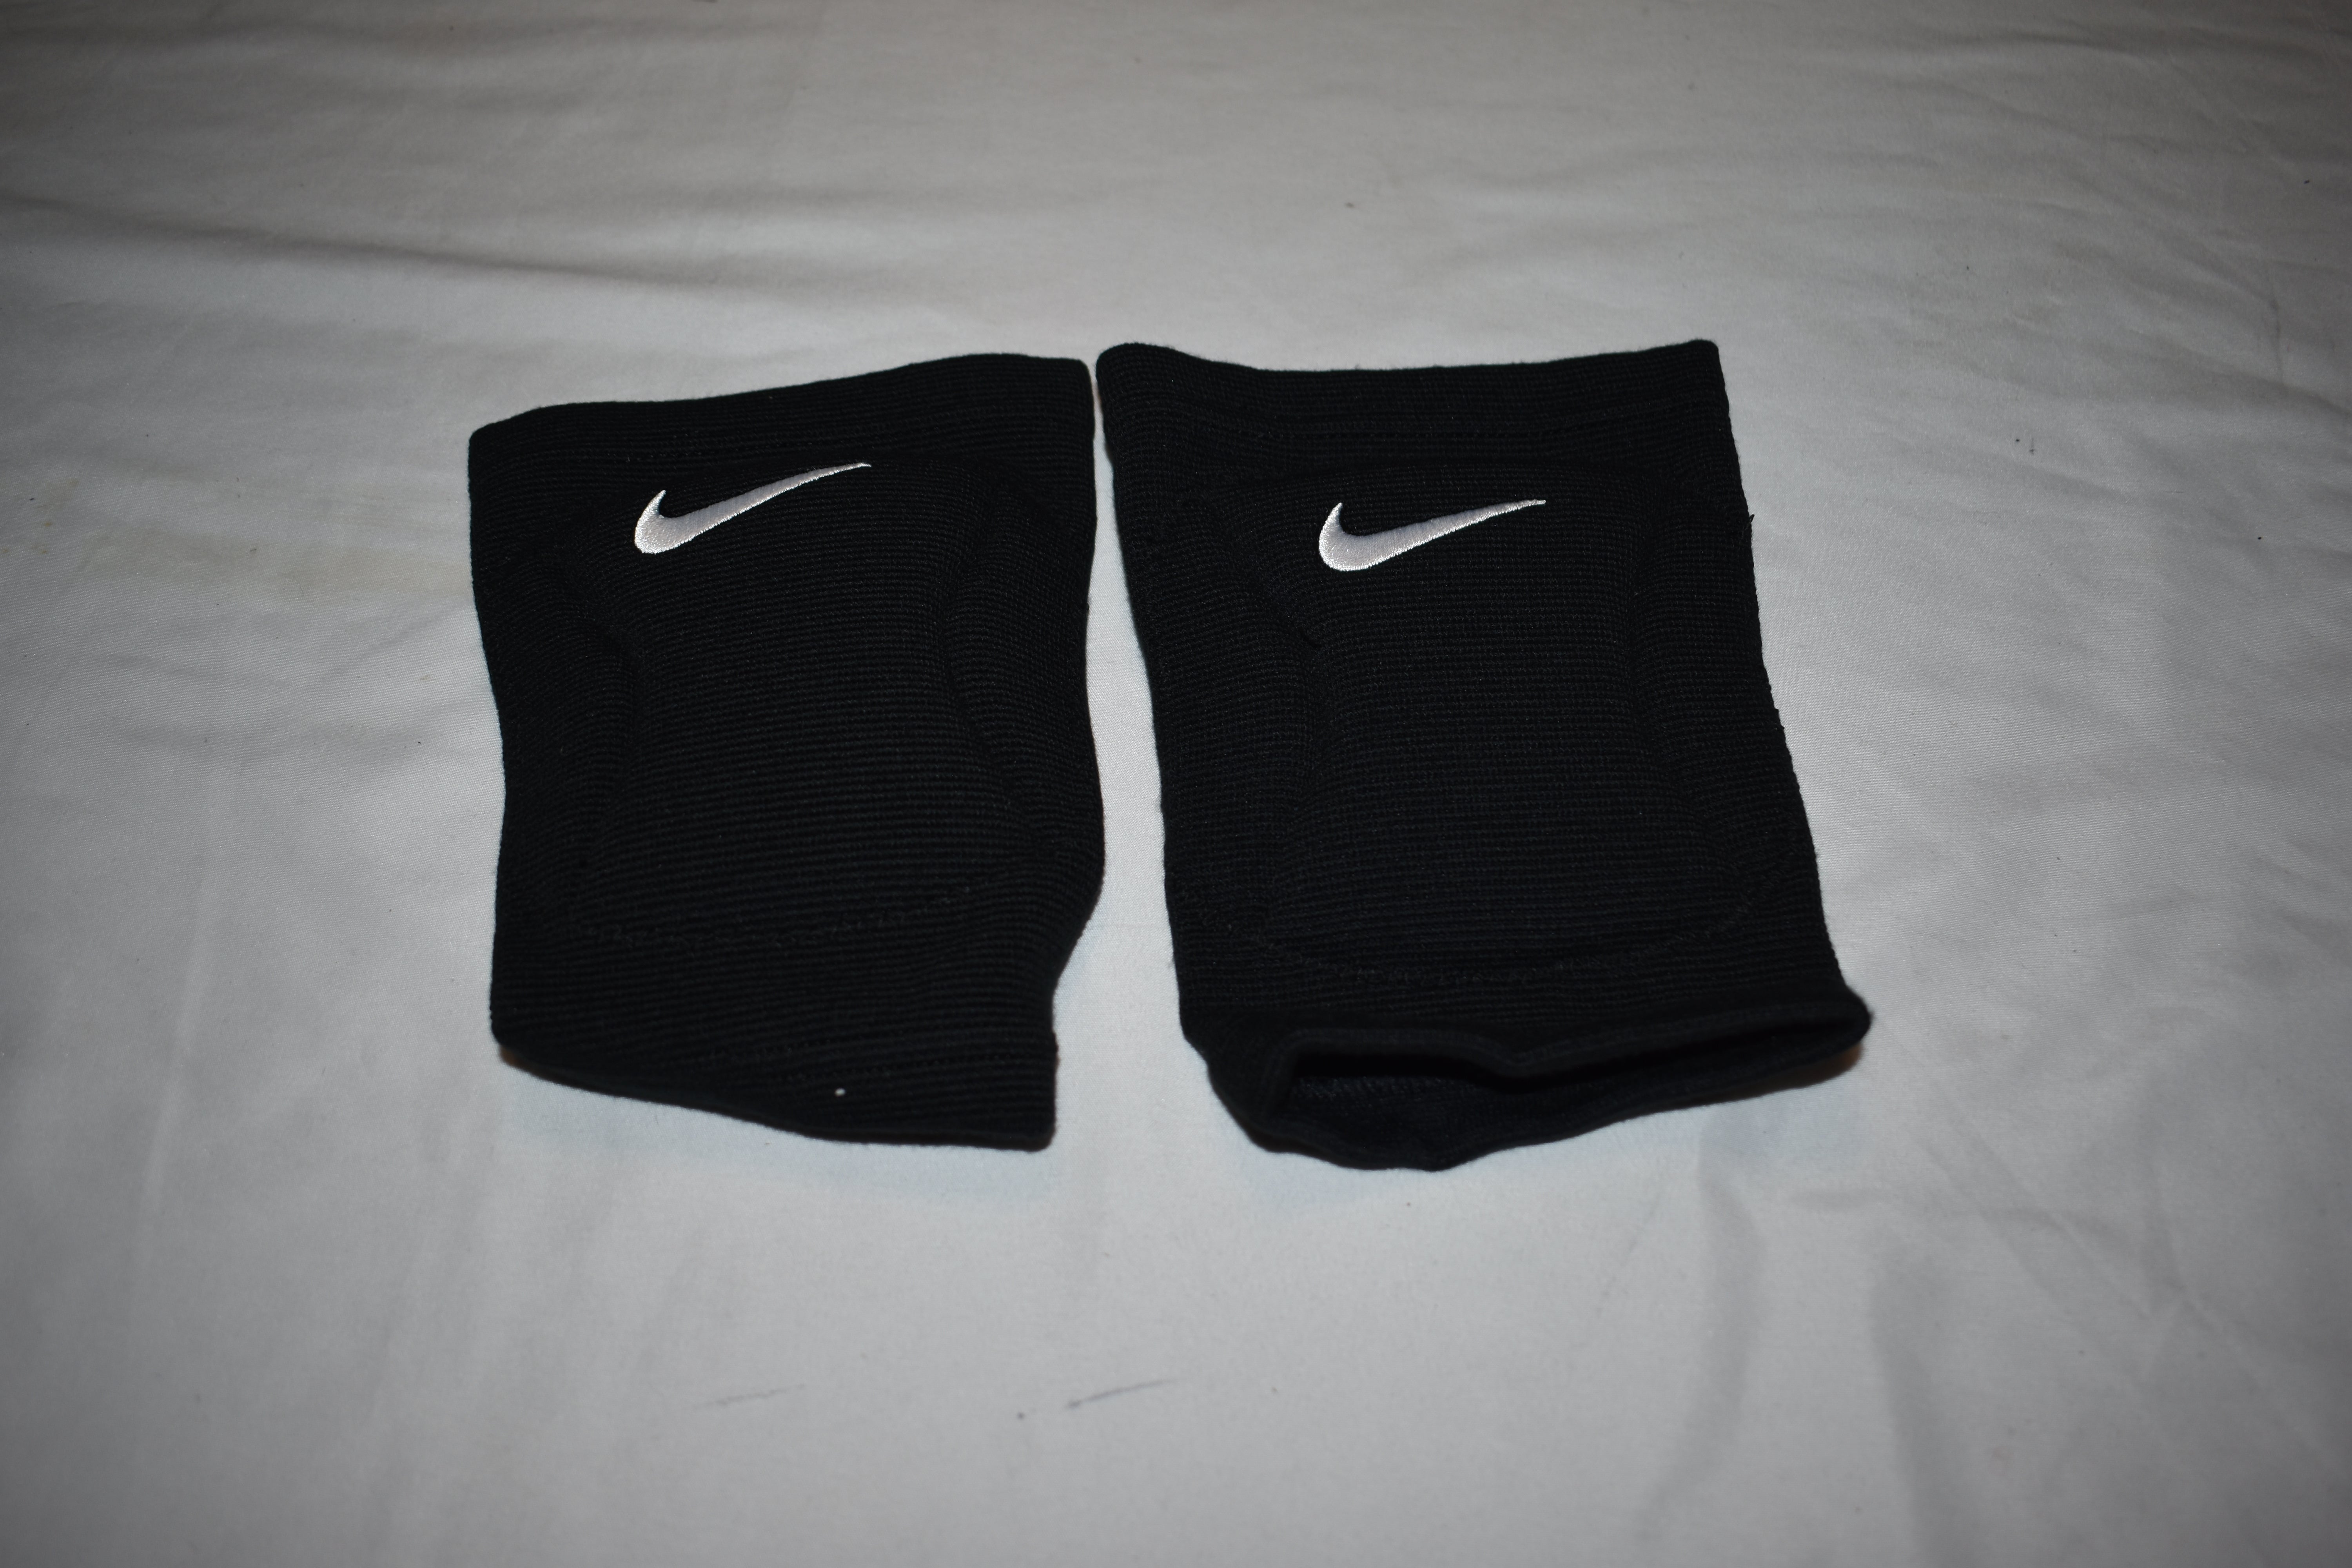 New Nike Pro Compression Adult Football Tights